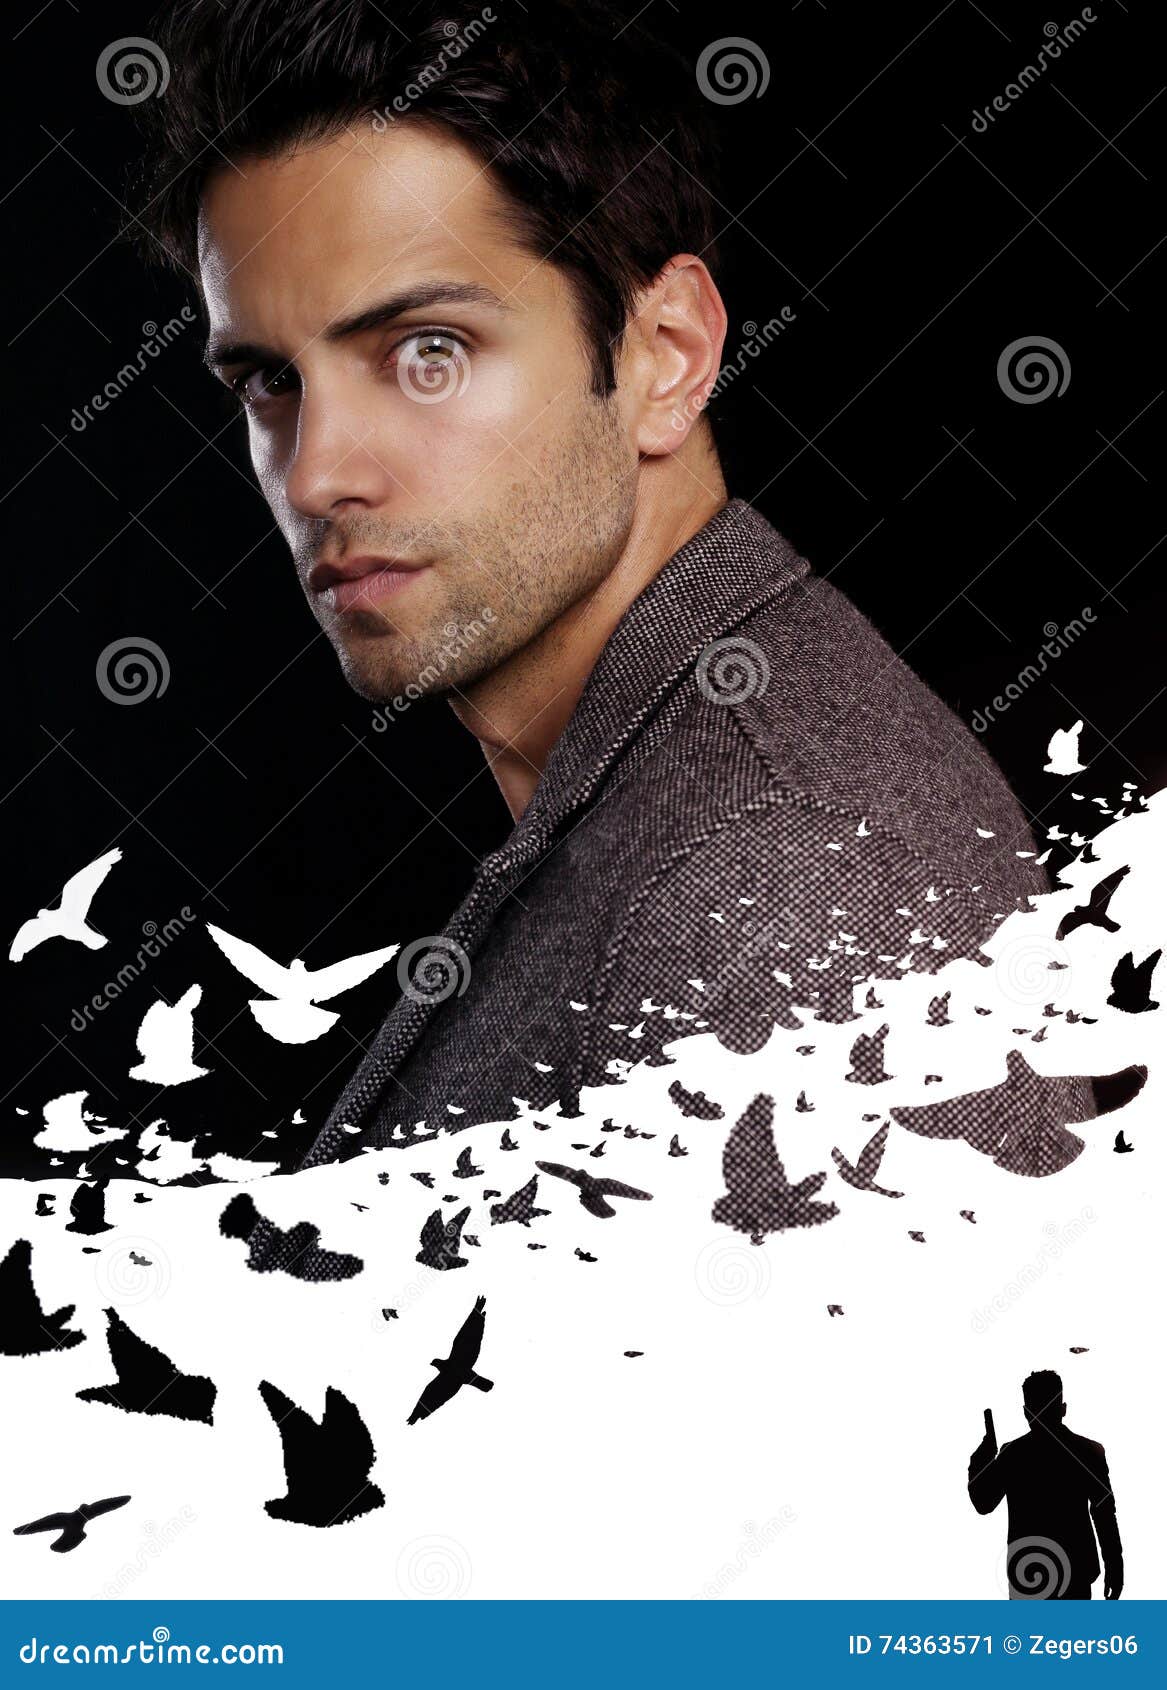 Detective Novel - Young Mysterious Man Stock Image - Image of novel, cover: 74363571